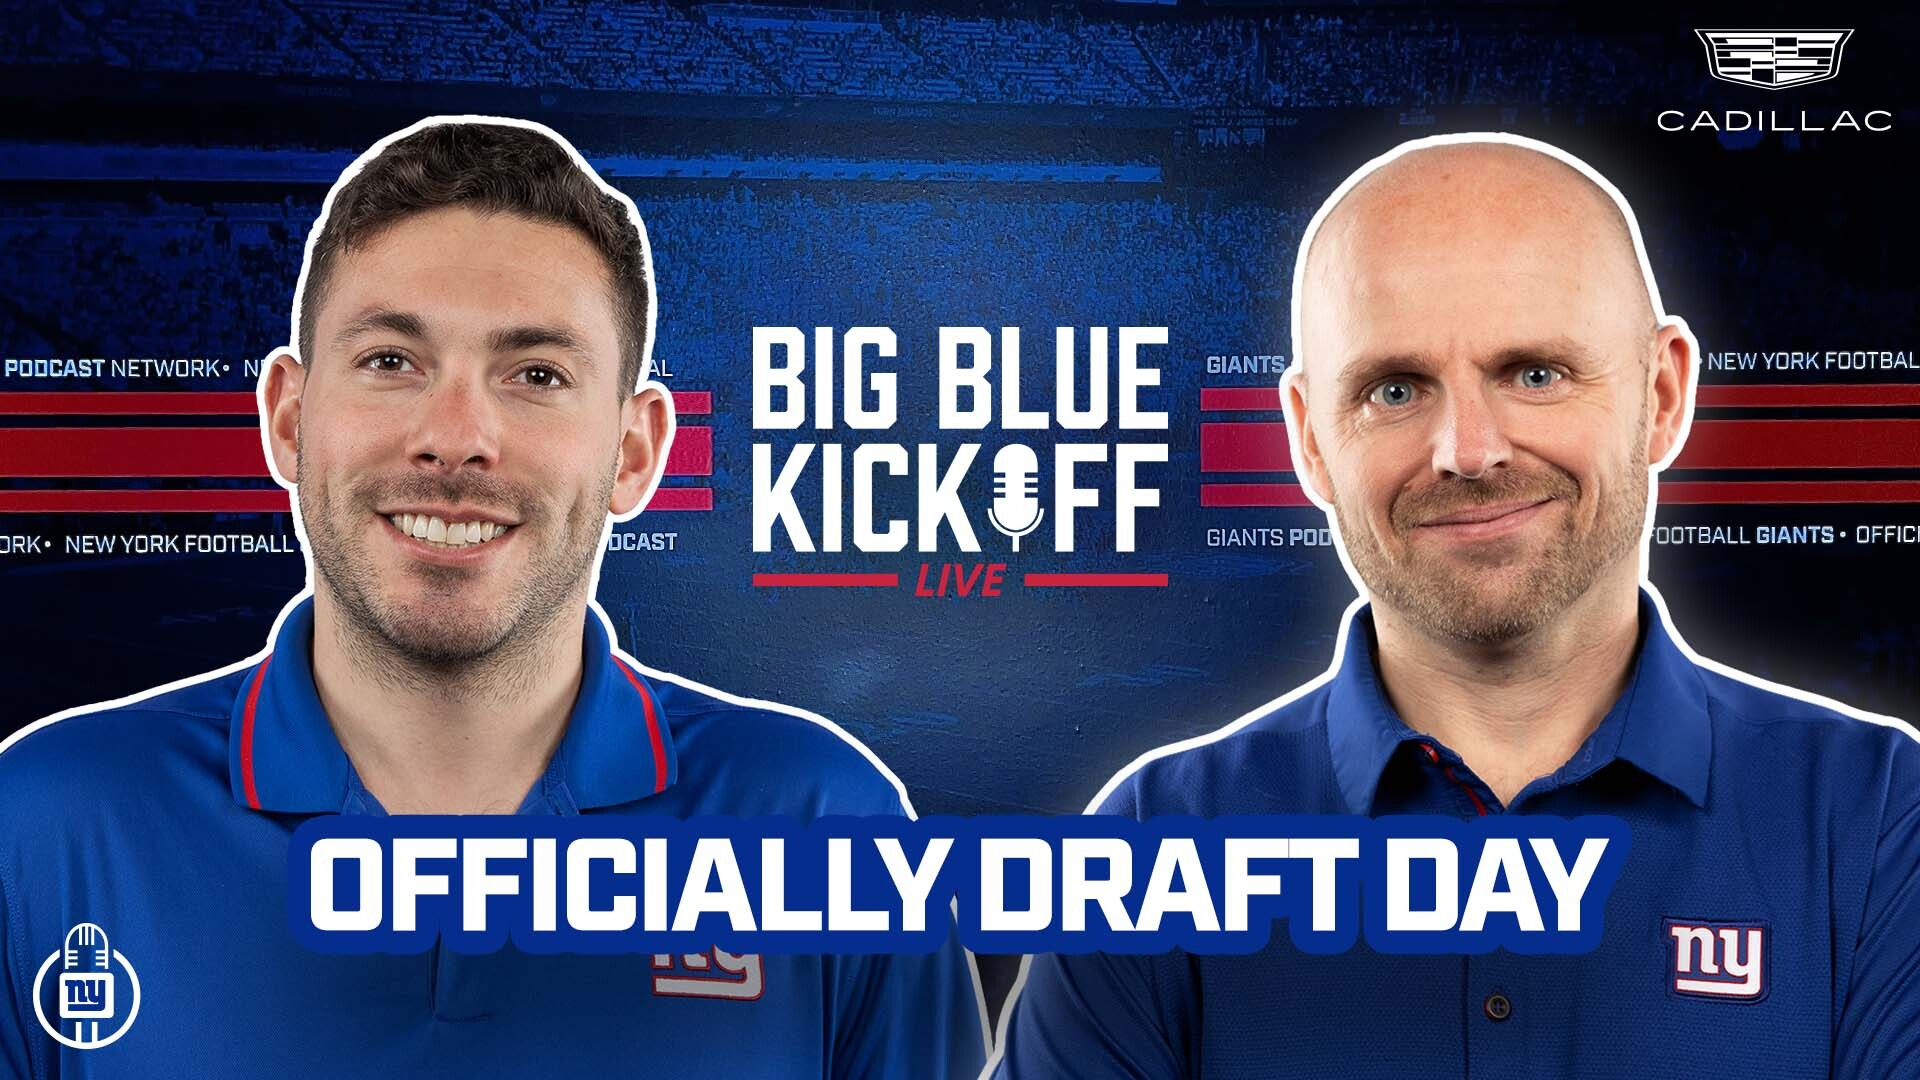 Big Blue Kickoff Live 4/25 | Officially Draft Day